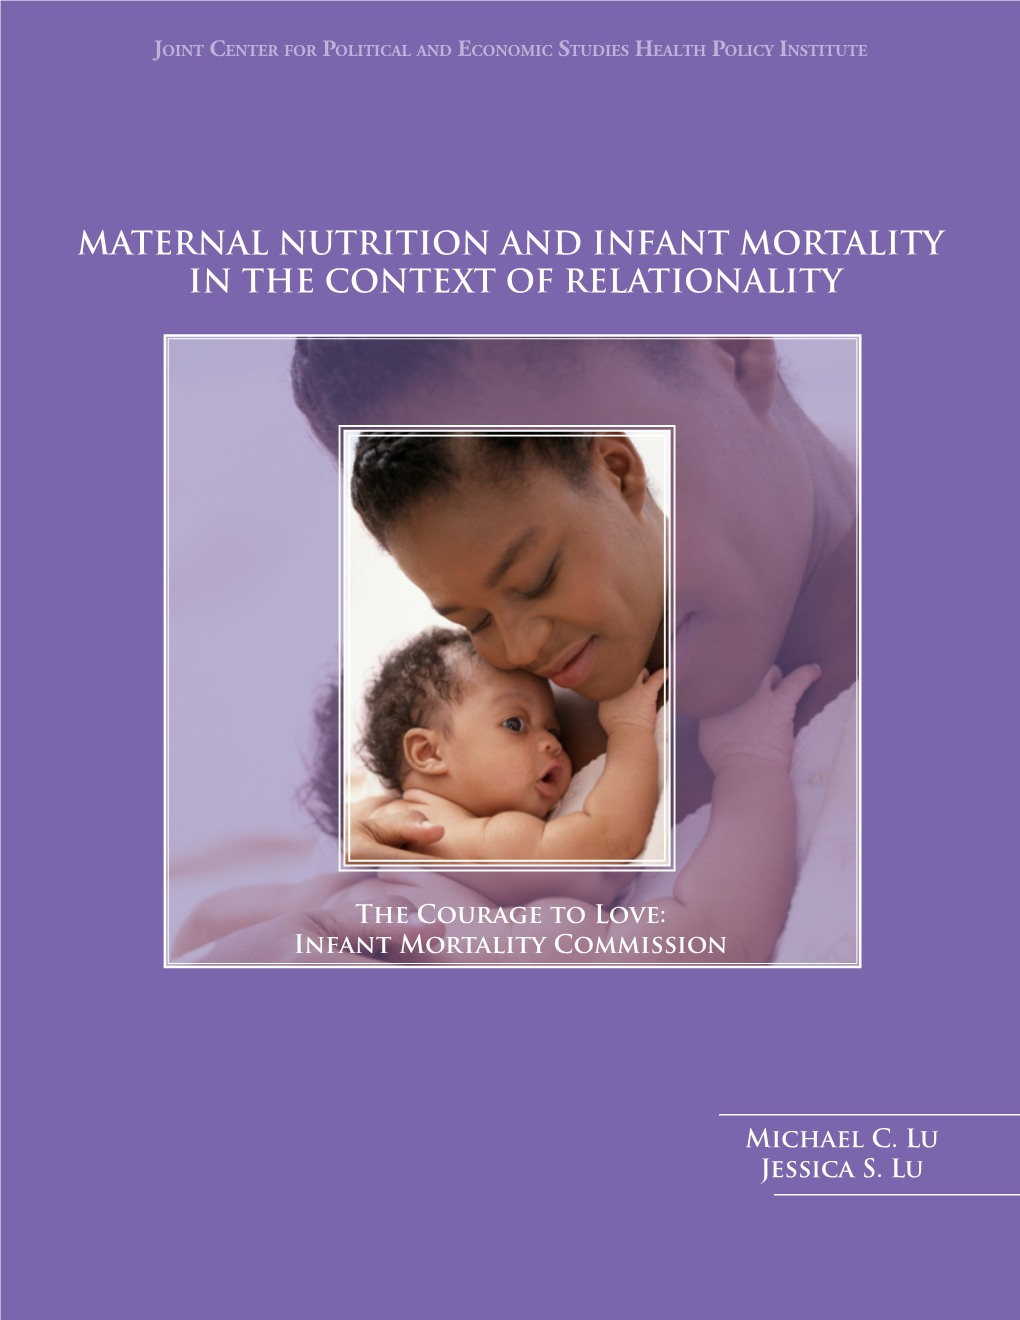 Maternal Nutrition and Infant Mortality in the Context of Relationality